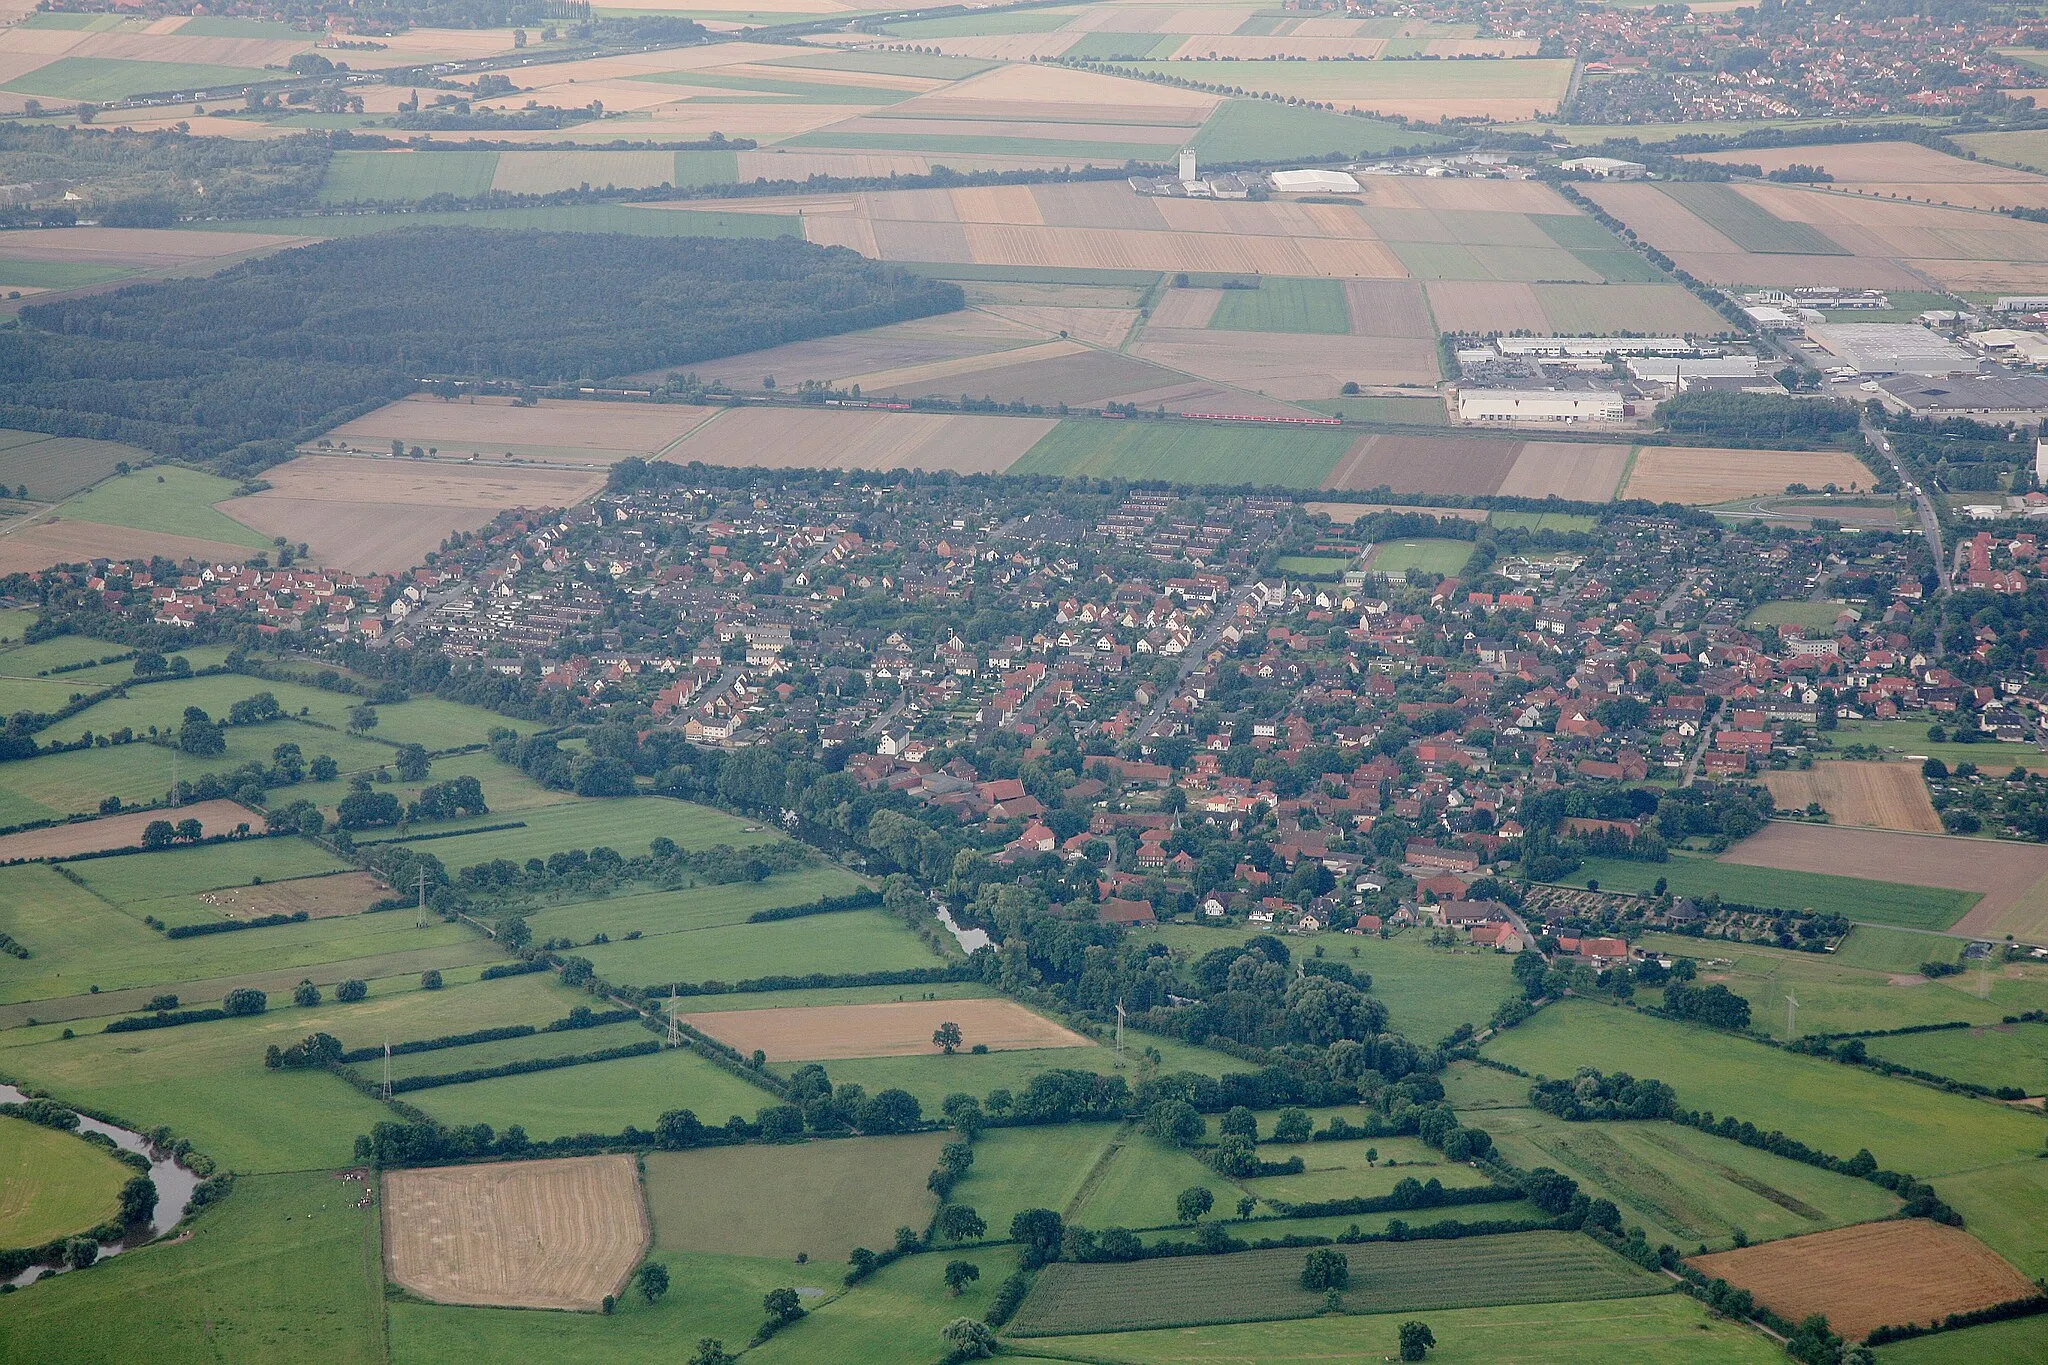 Photo showing: Aerial shot of Luthe, a suburb of the town of Wunstorf near Hannover in Germany. The river Leine is visible in the bottom left, in the background the railwayline Hannover-Minden runs through the image with freight train and a red local commuter train visible.